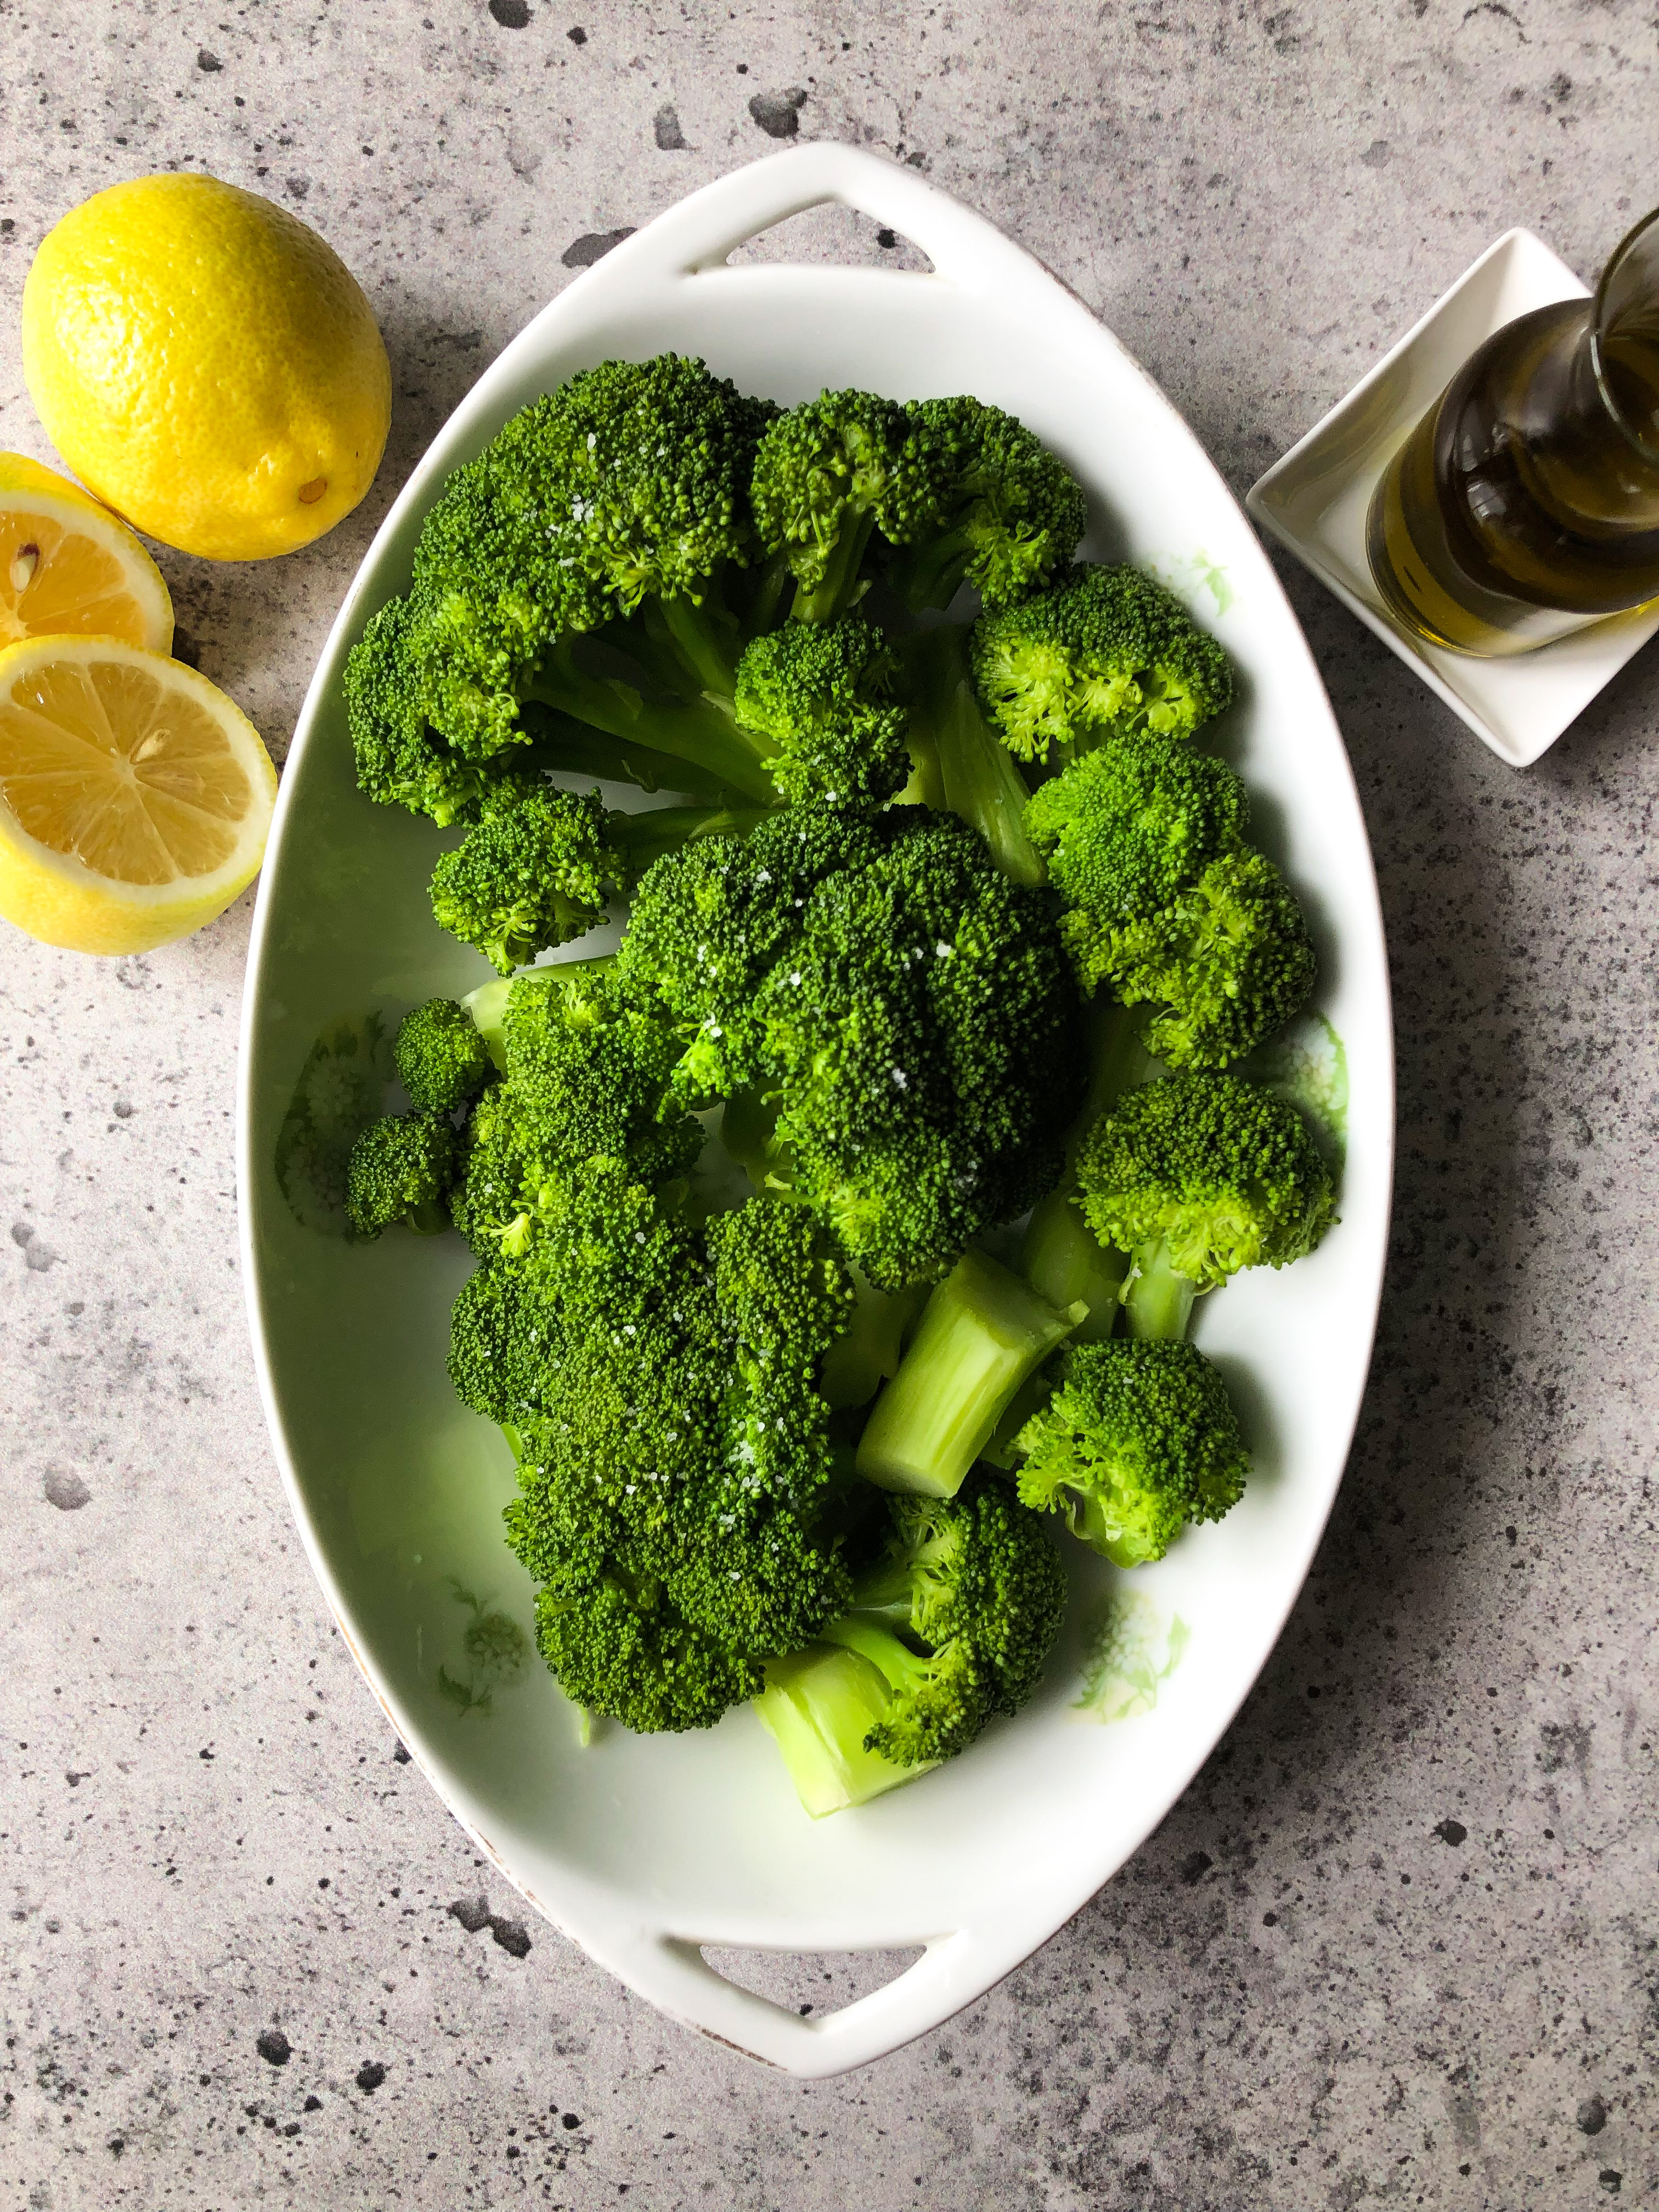 Broccoli with olive oil and lemon